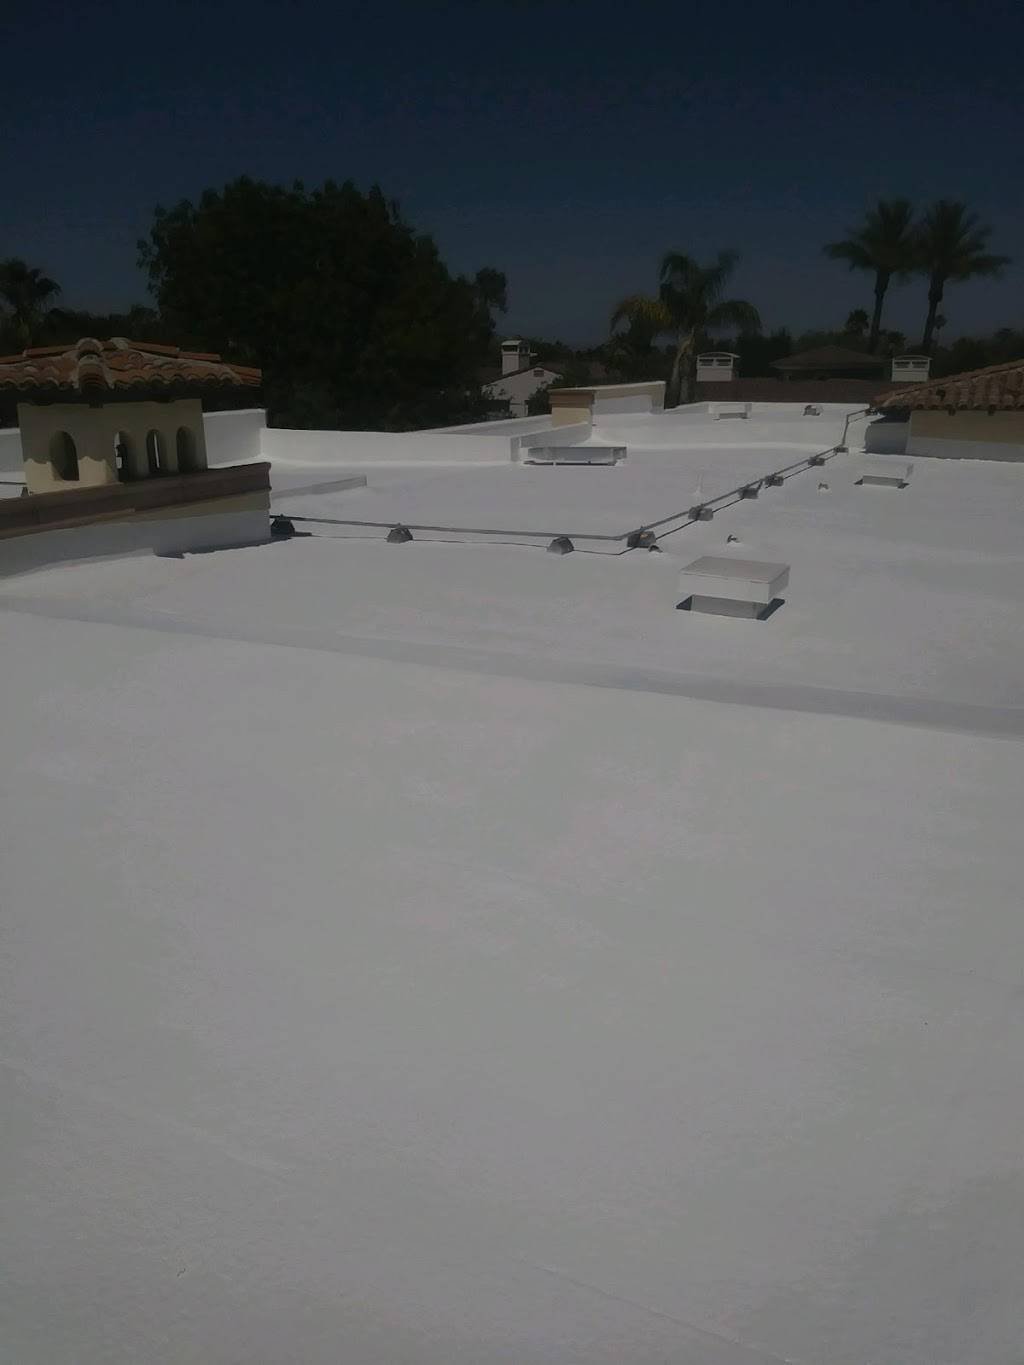 Canyon State Roofing & Consulting | 847 E Bruce Ave, Gilbert, AZ 85234, USA | Phone: (480) 369-4778